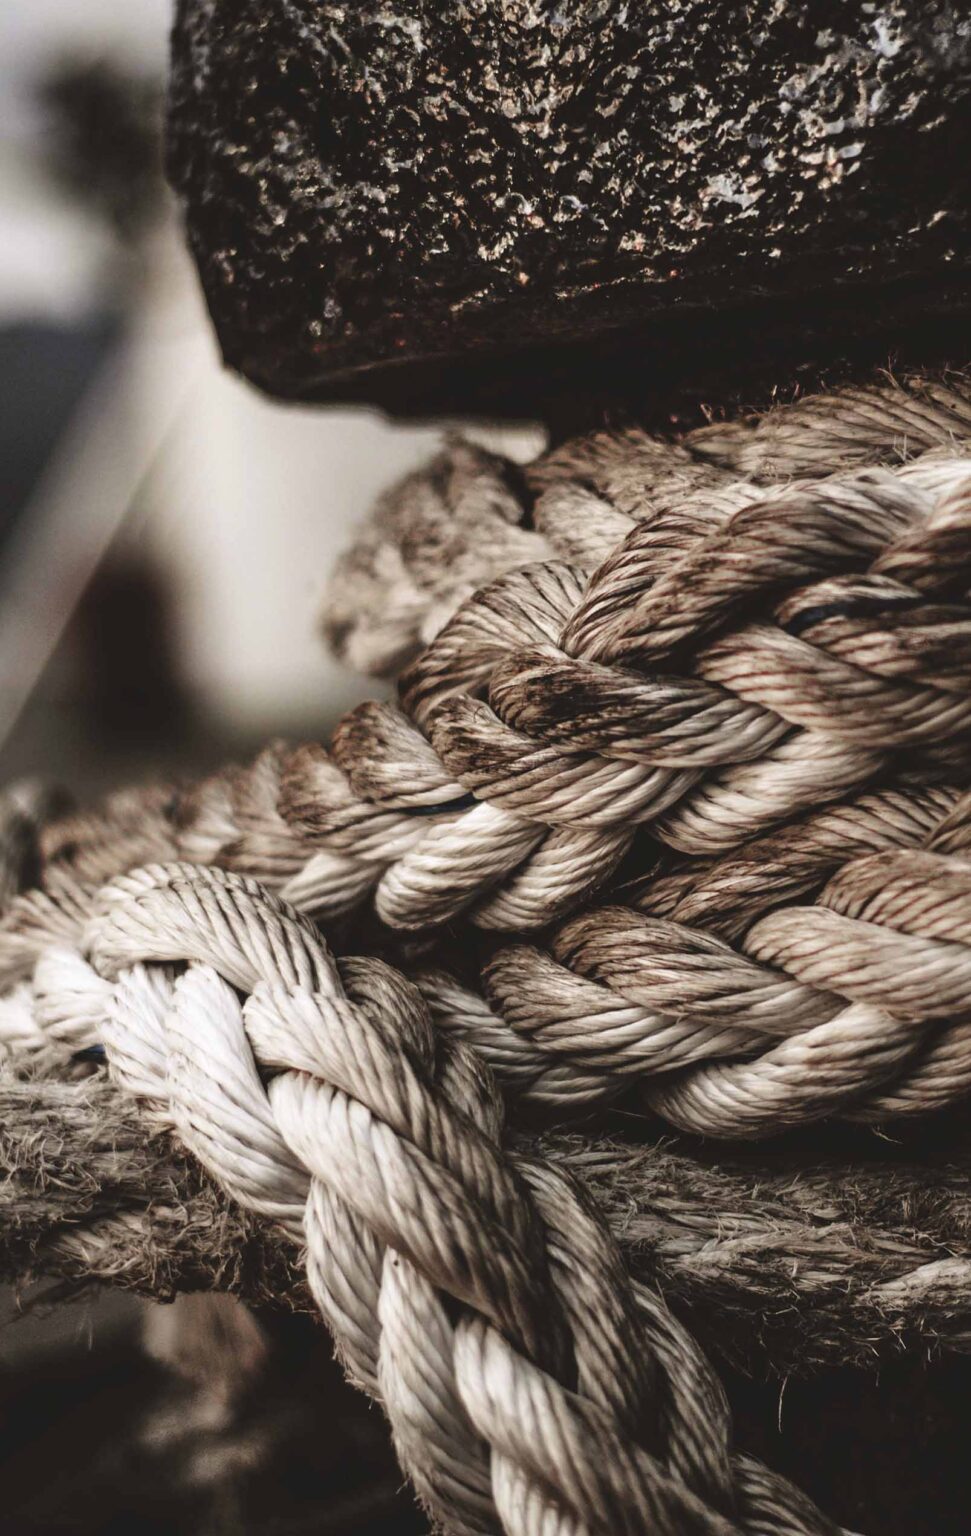 A close-up of a thick, twisted rope in muted beige tones, giving a sense of strength and durability. The texture of the rope is prominently displayed, with individual strands visibly interwoven. The background is out of focus, but one can discern what appears to be a weathered, rough surface, possibly metal, suggesting a maritime or industrial setting. The detailed focus on the rope highlights its robust structure and the essential role it plays in securing heavy objects, likely in a shipping or nautical context.